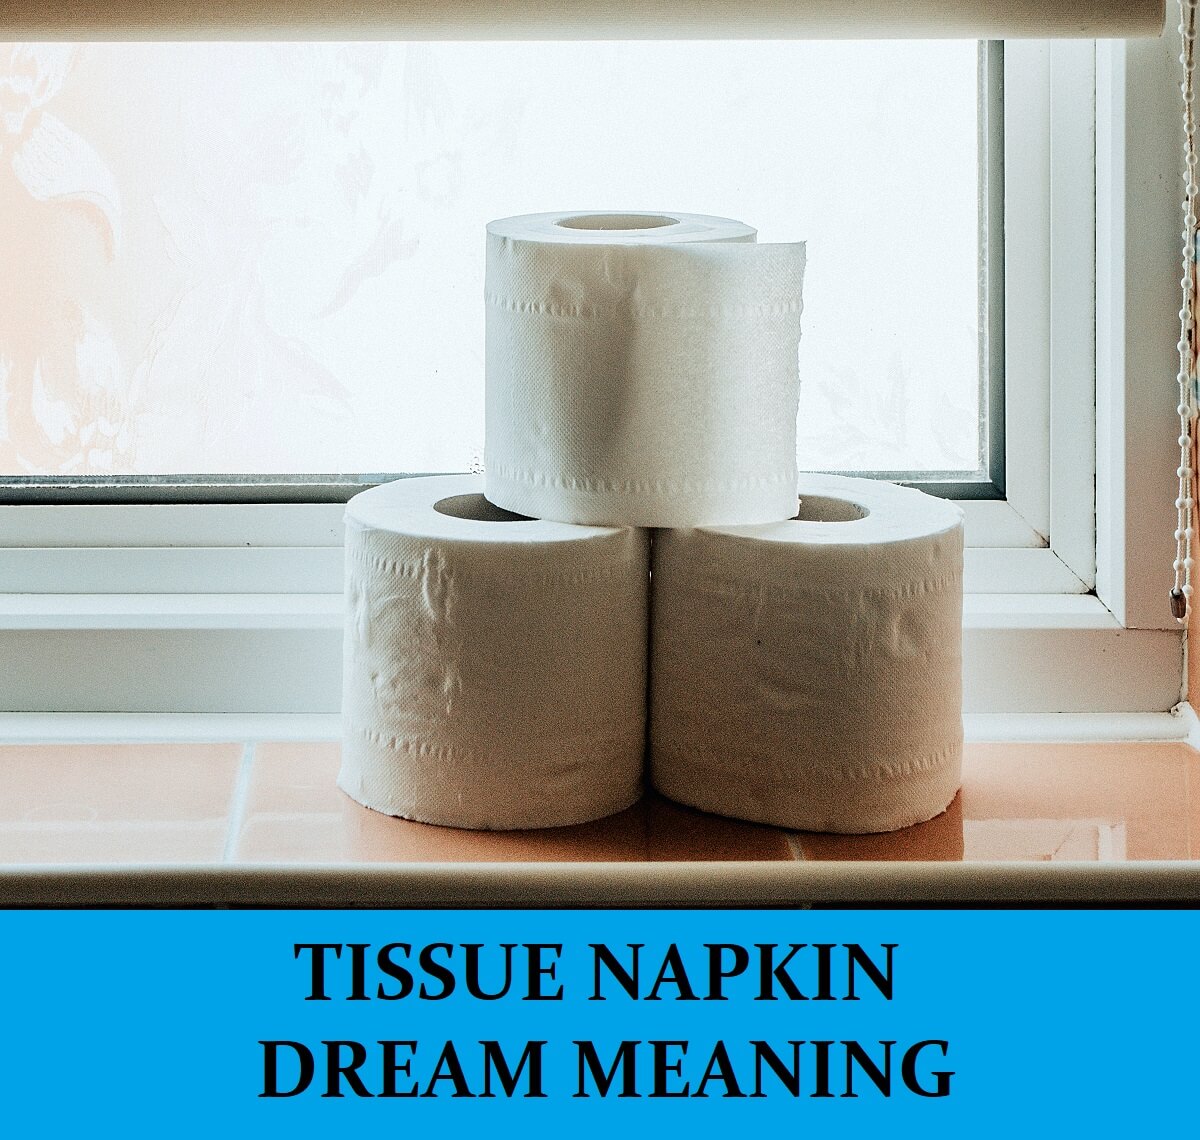 Dream About Tissues Napkins